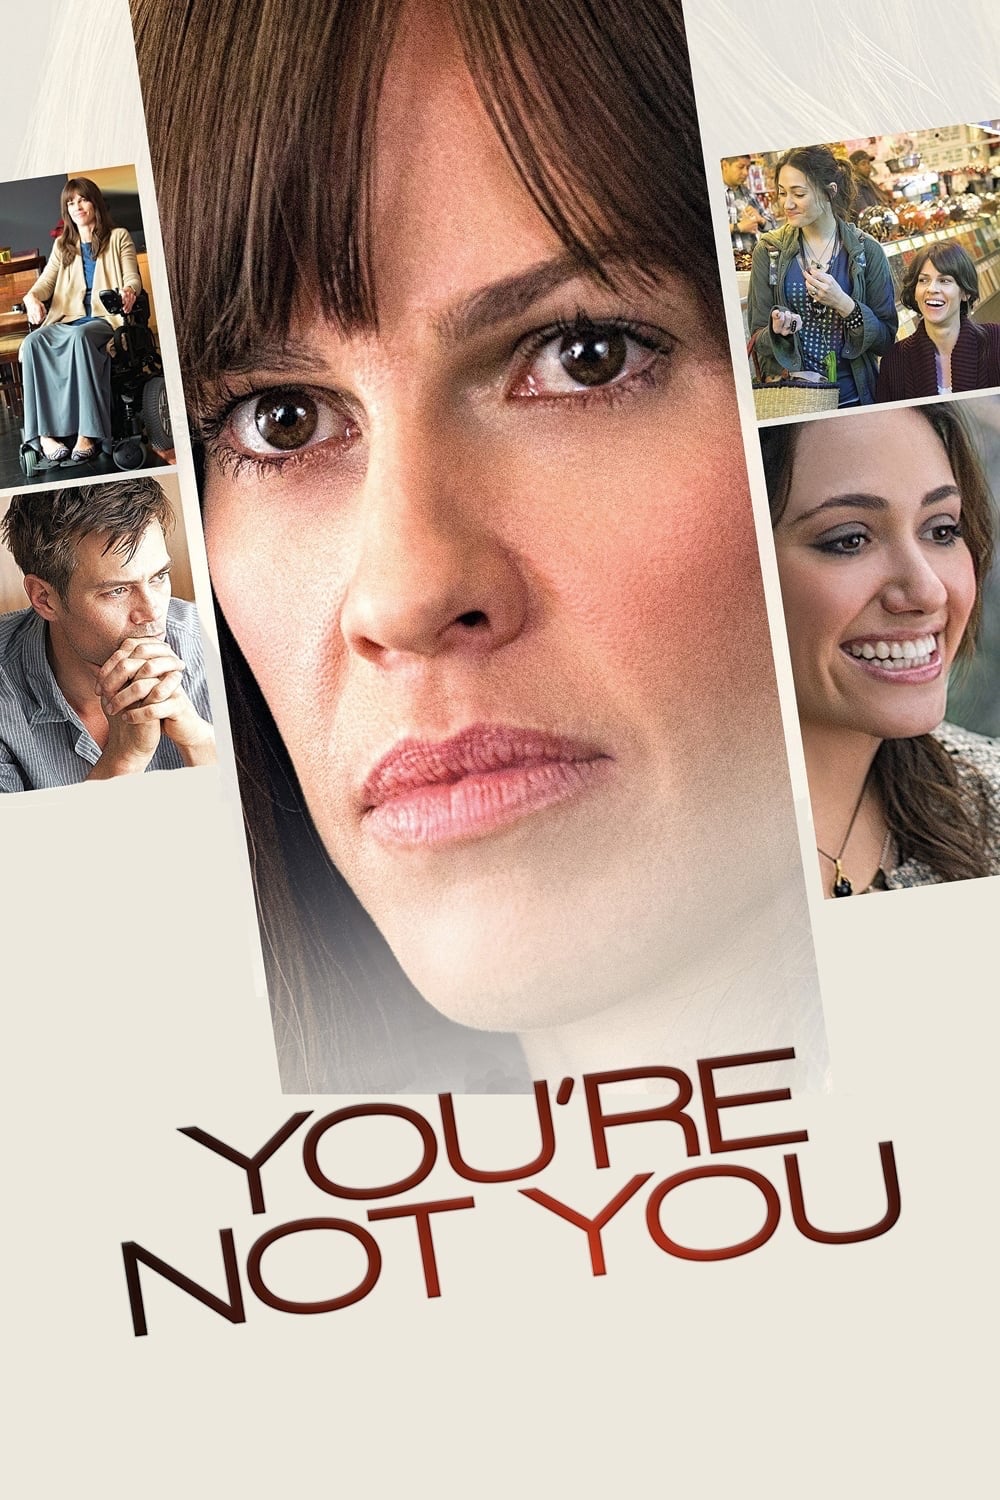 You're Not You (2014)